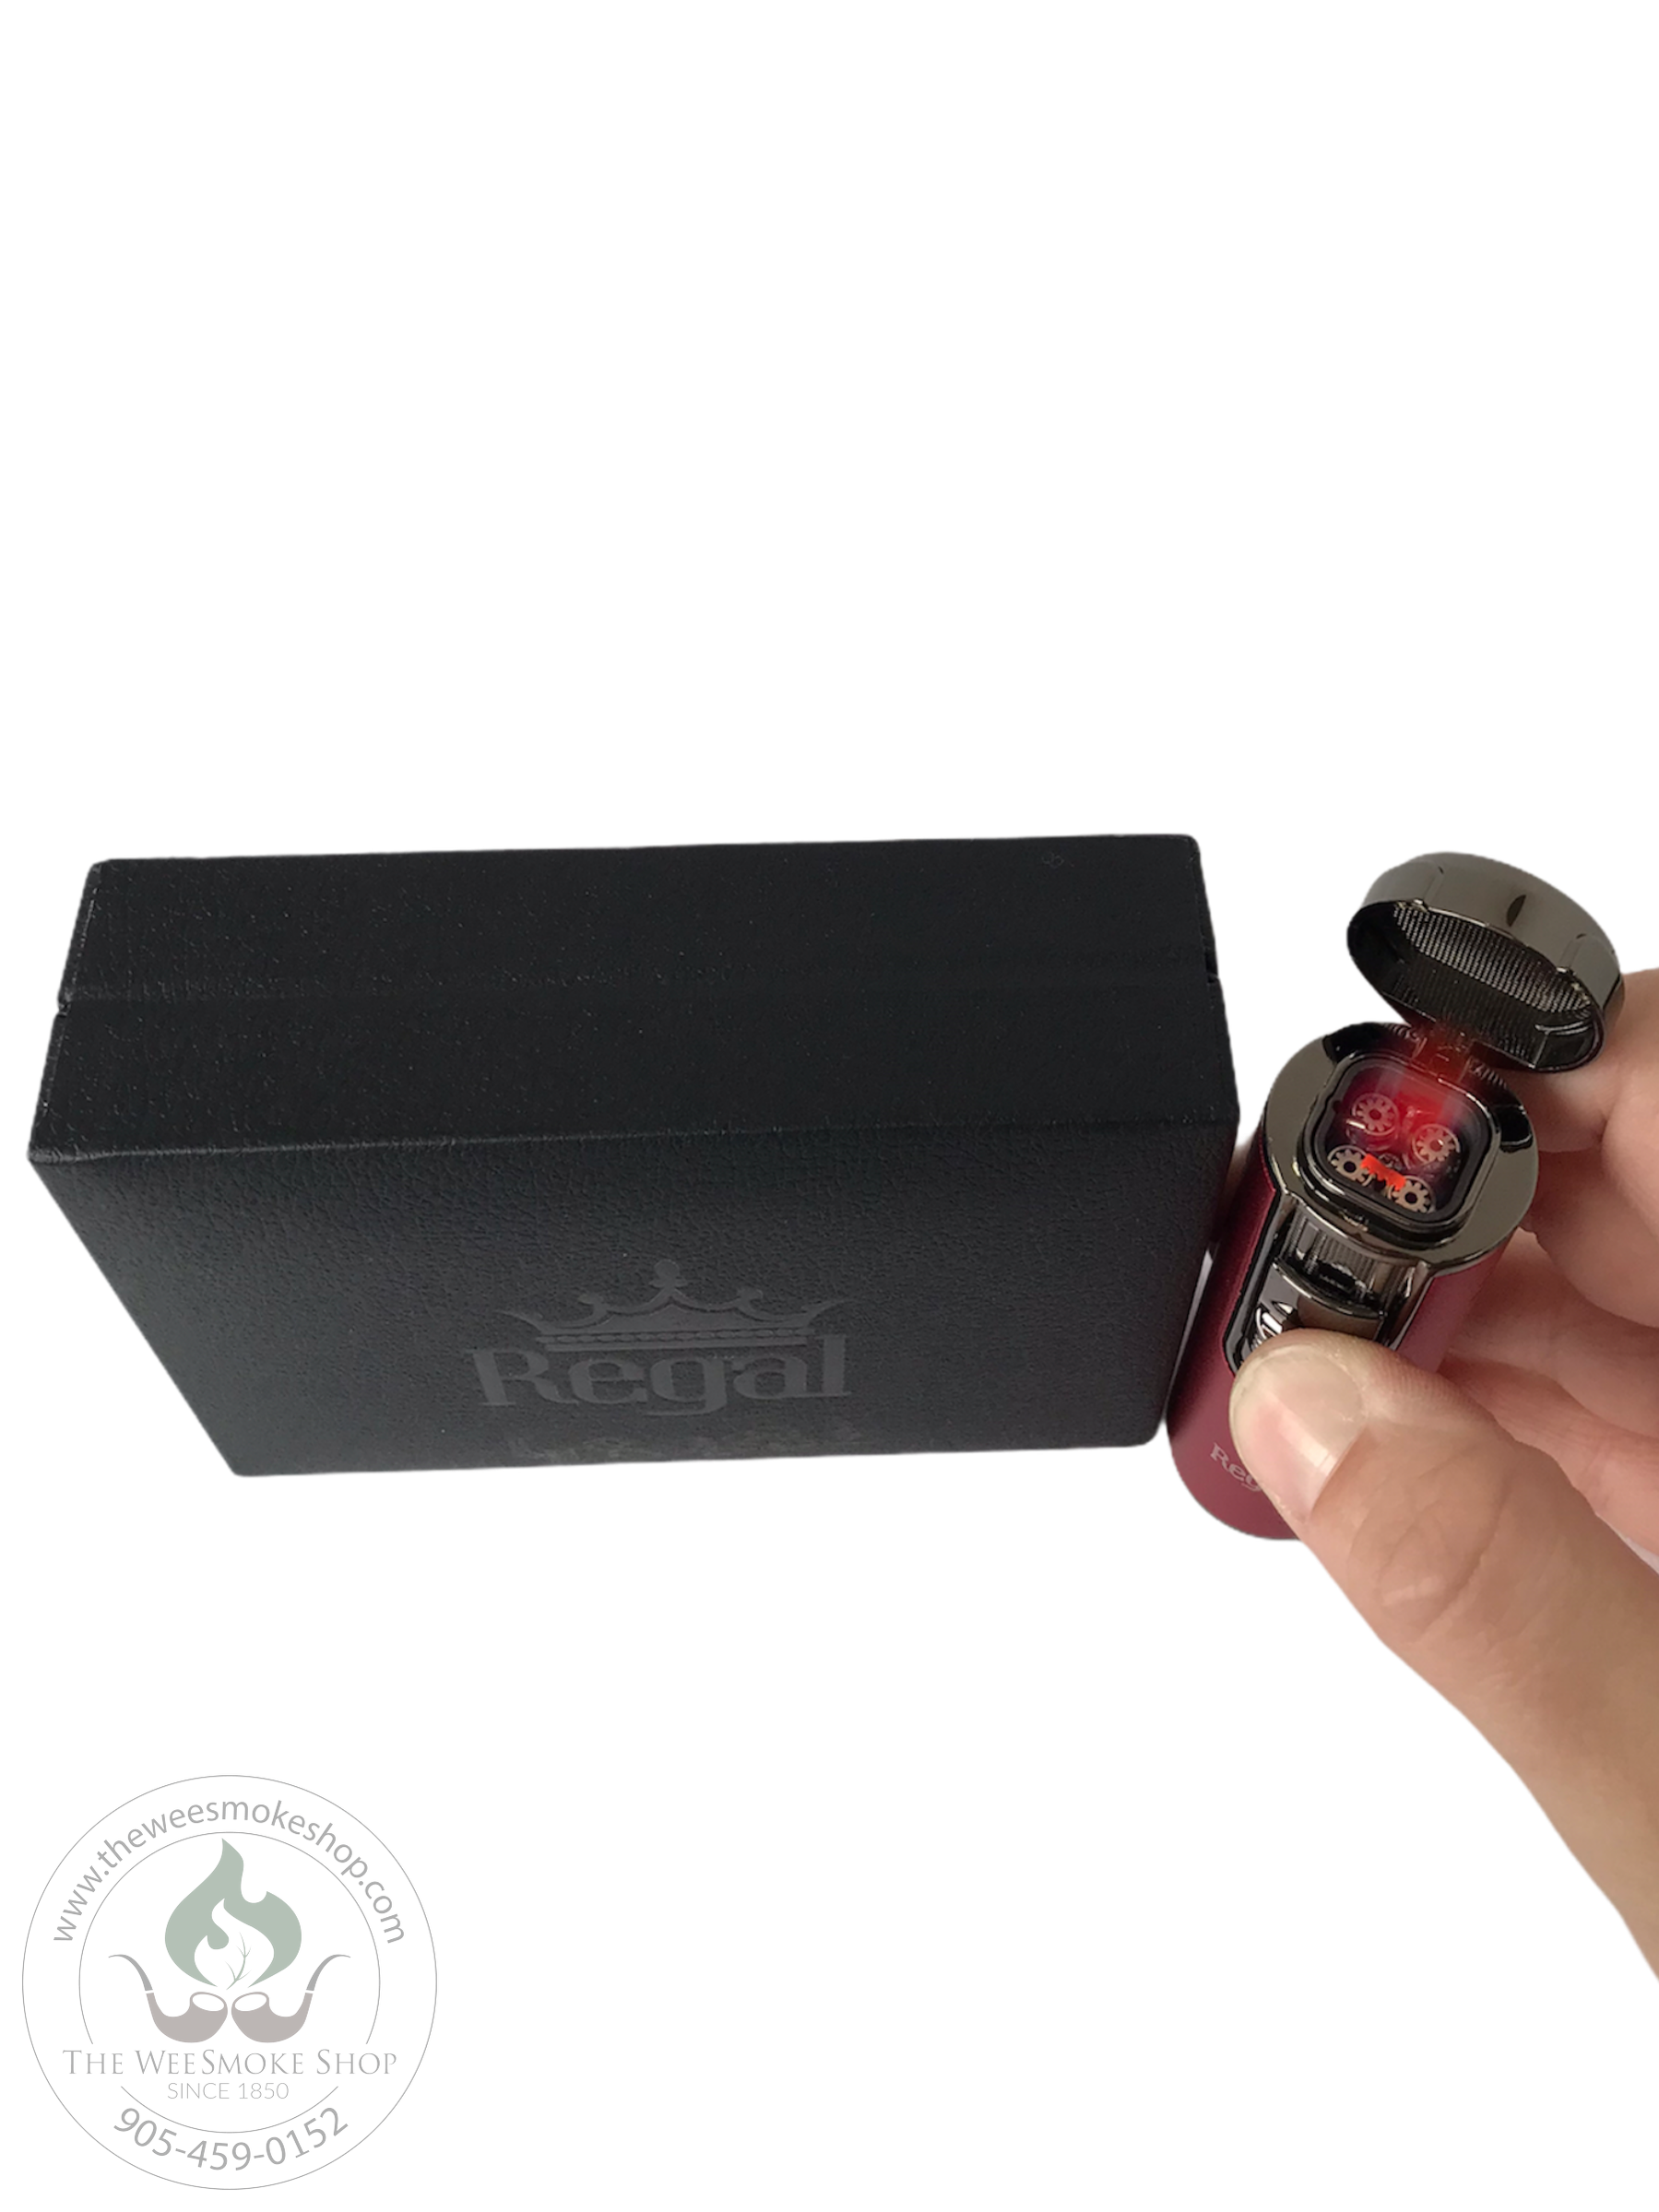 Red Regal Cylinder Quad Flame Torch - Torch Lighter - Wee Smoke Shop